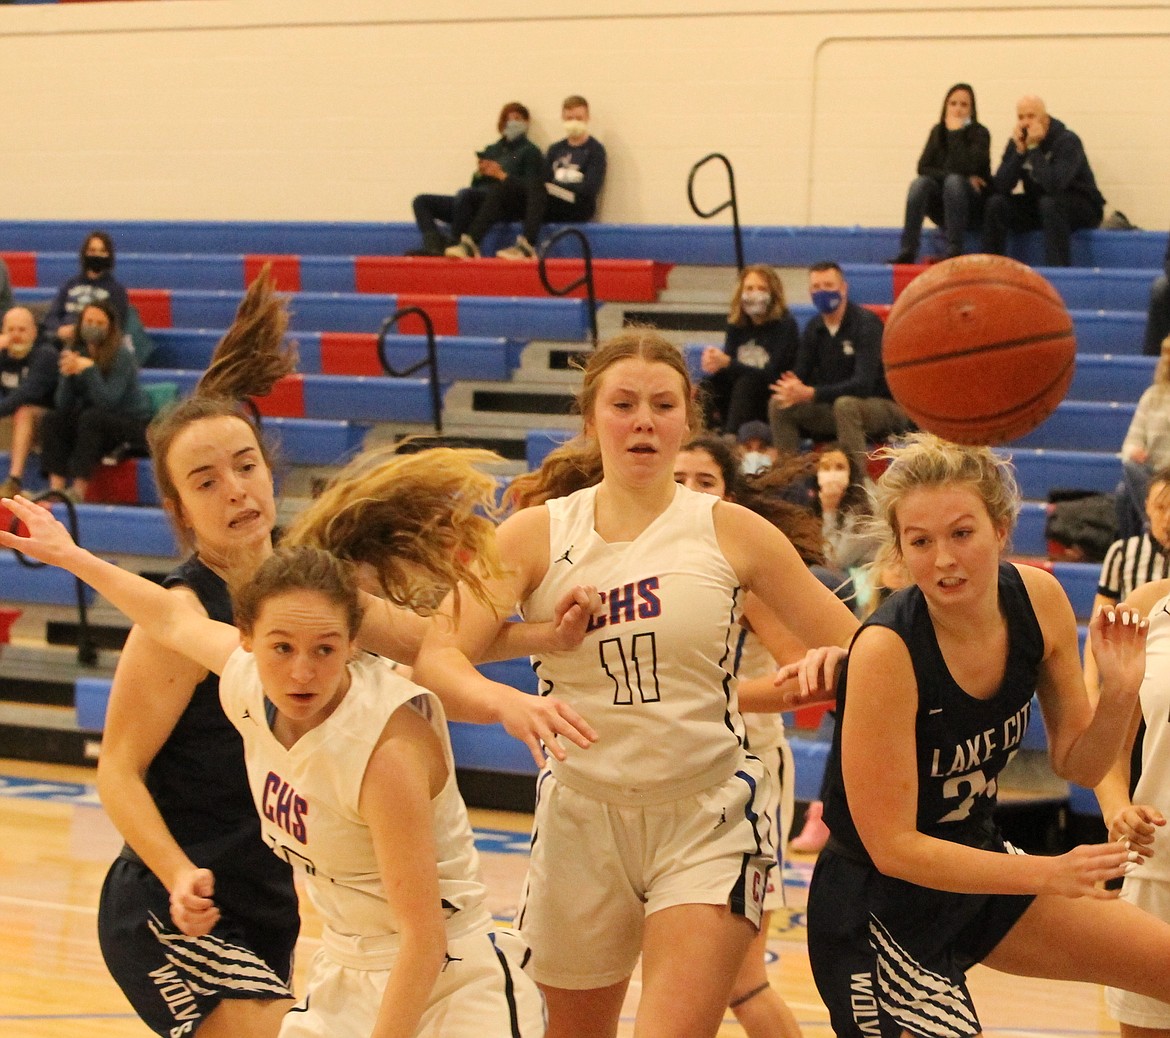 JASON ELLIOTT/Press
Coeur d'Alene's Emma Whiteman (10) and Madi Symons (11) attempt to chase down a loose ball from Lake City's Brenna Hawkins (24) during the second half of Friday's game at Viking Court.